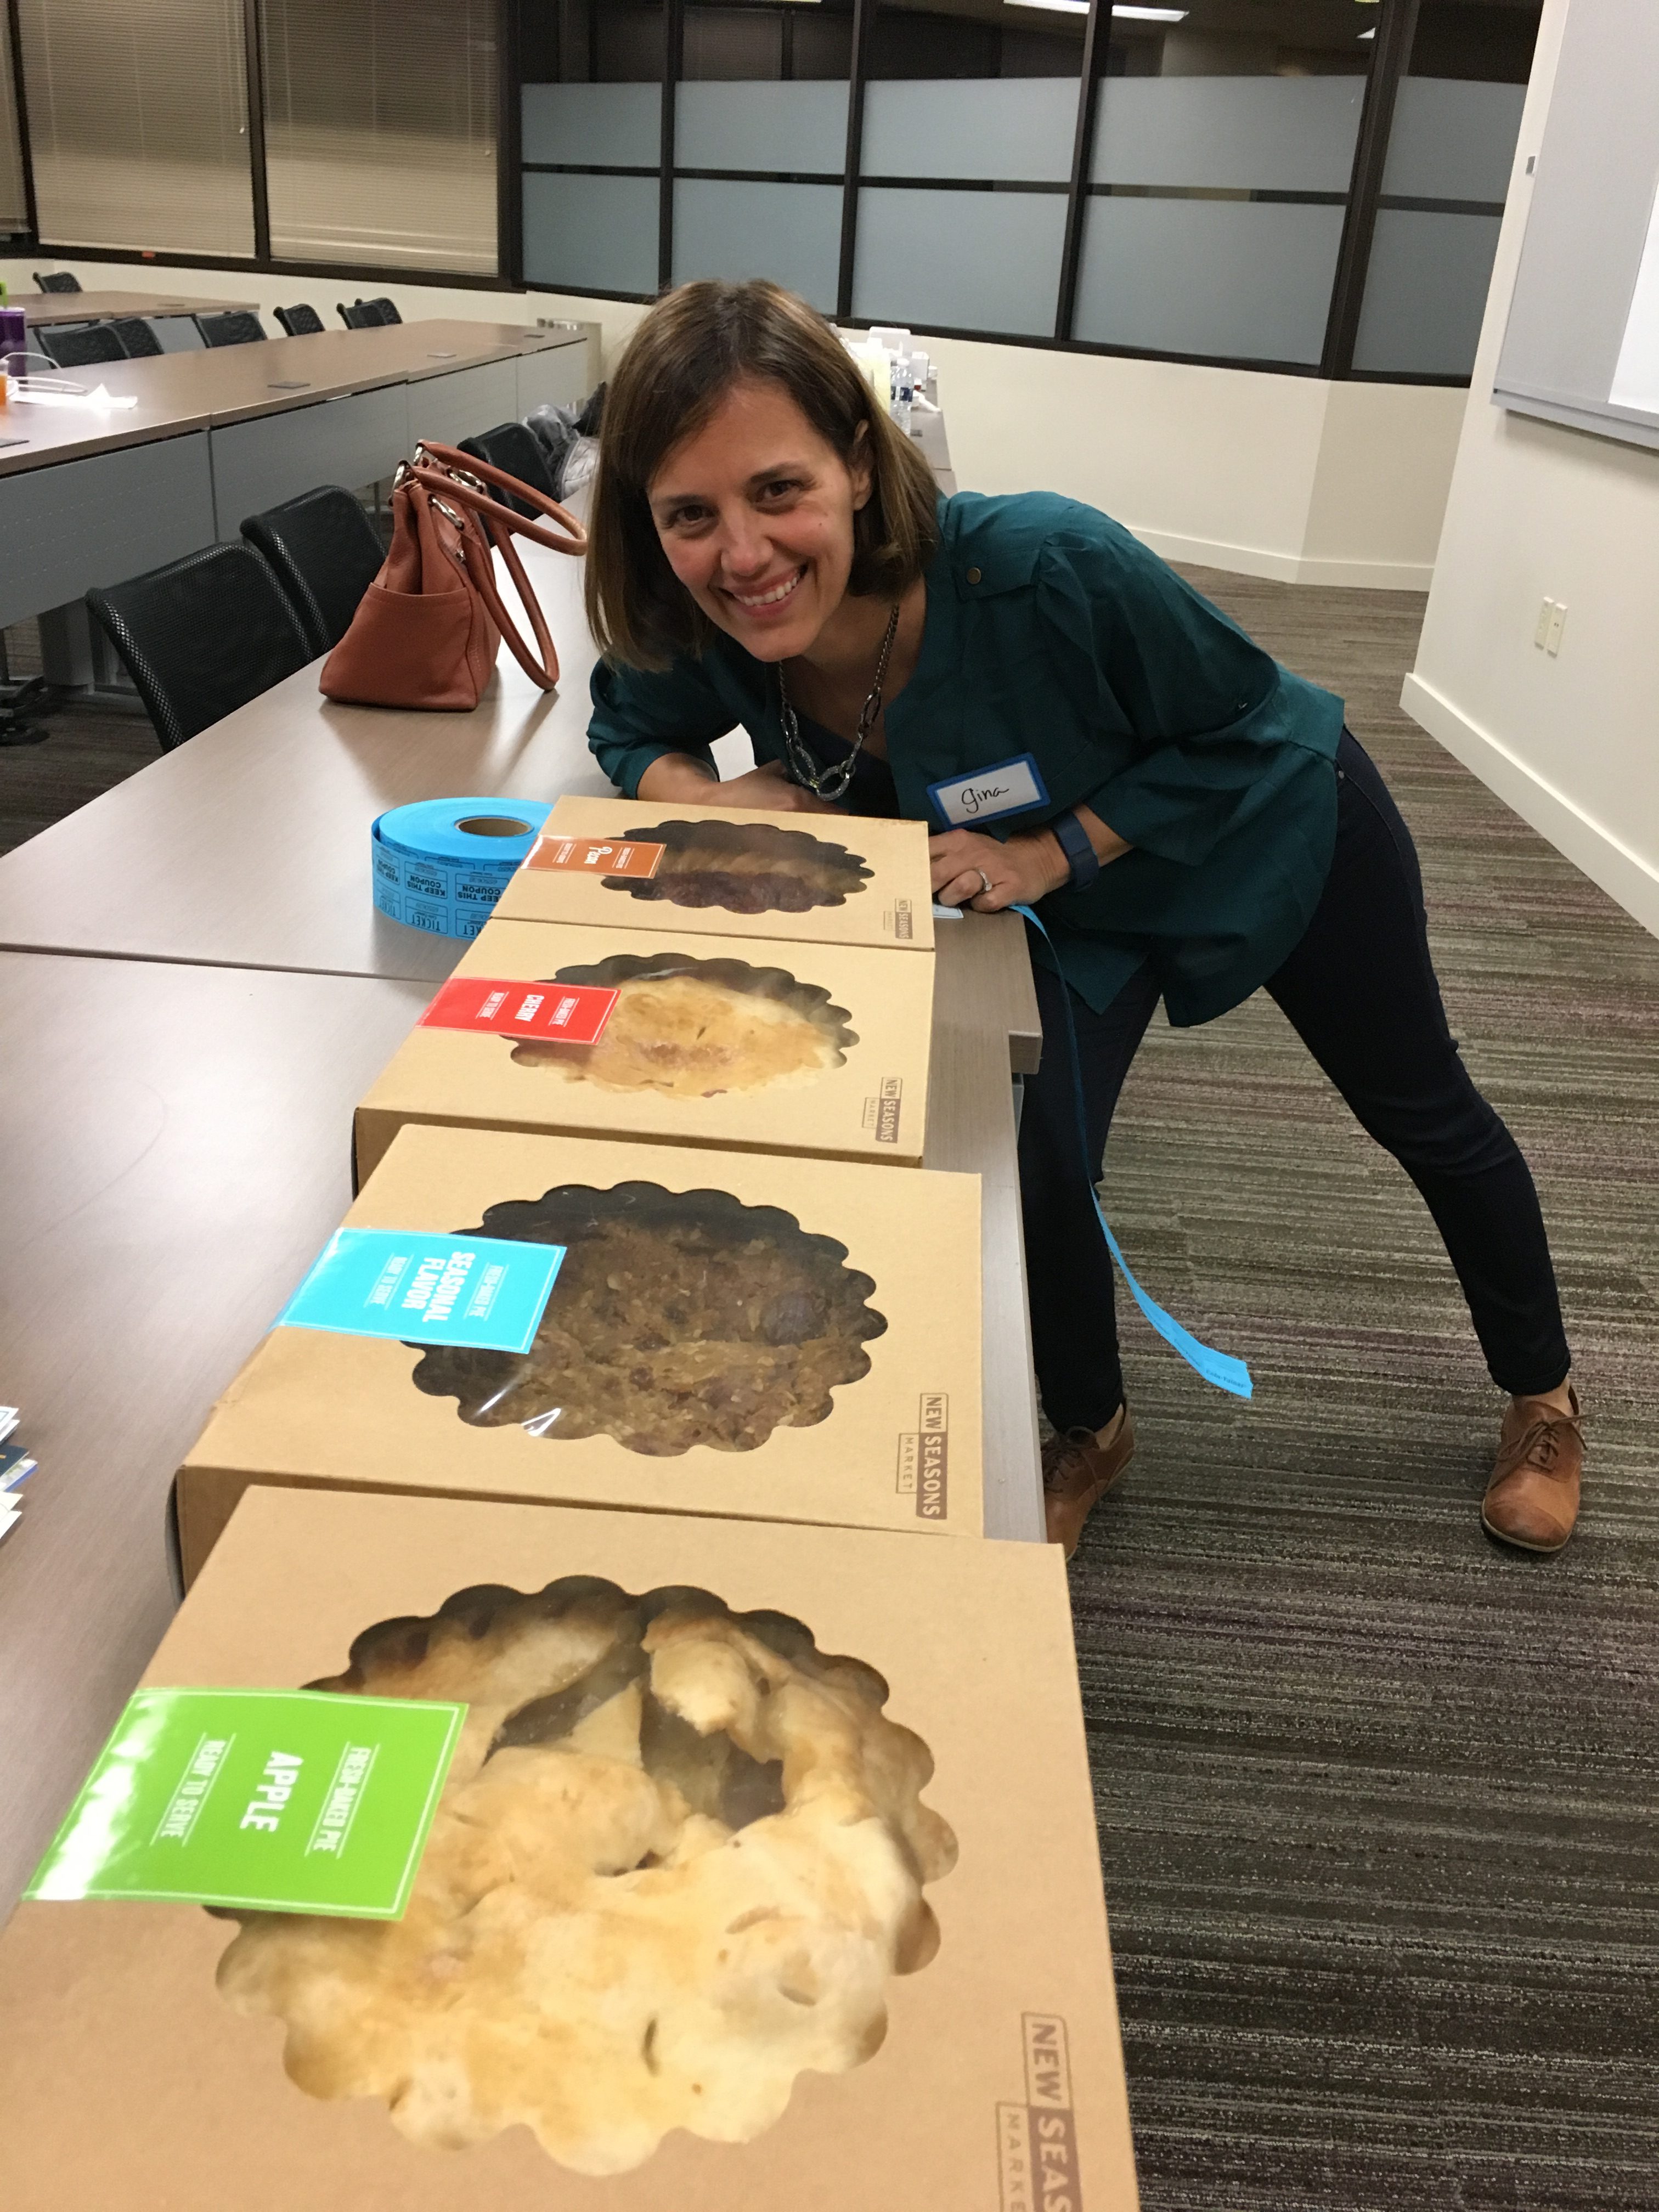 Learning outcomes were improved by raffling off pies before our fall PD event! Who doesn't love pie?